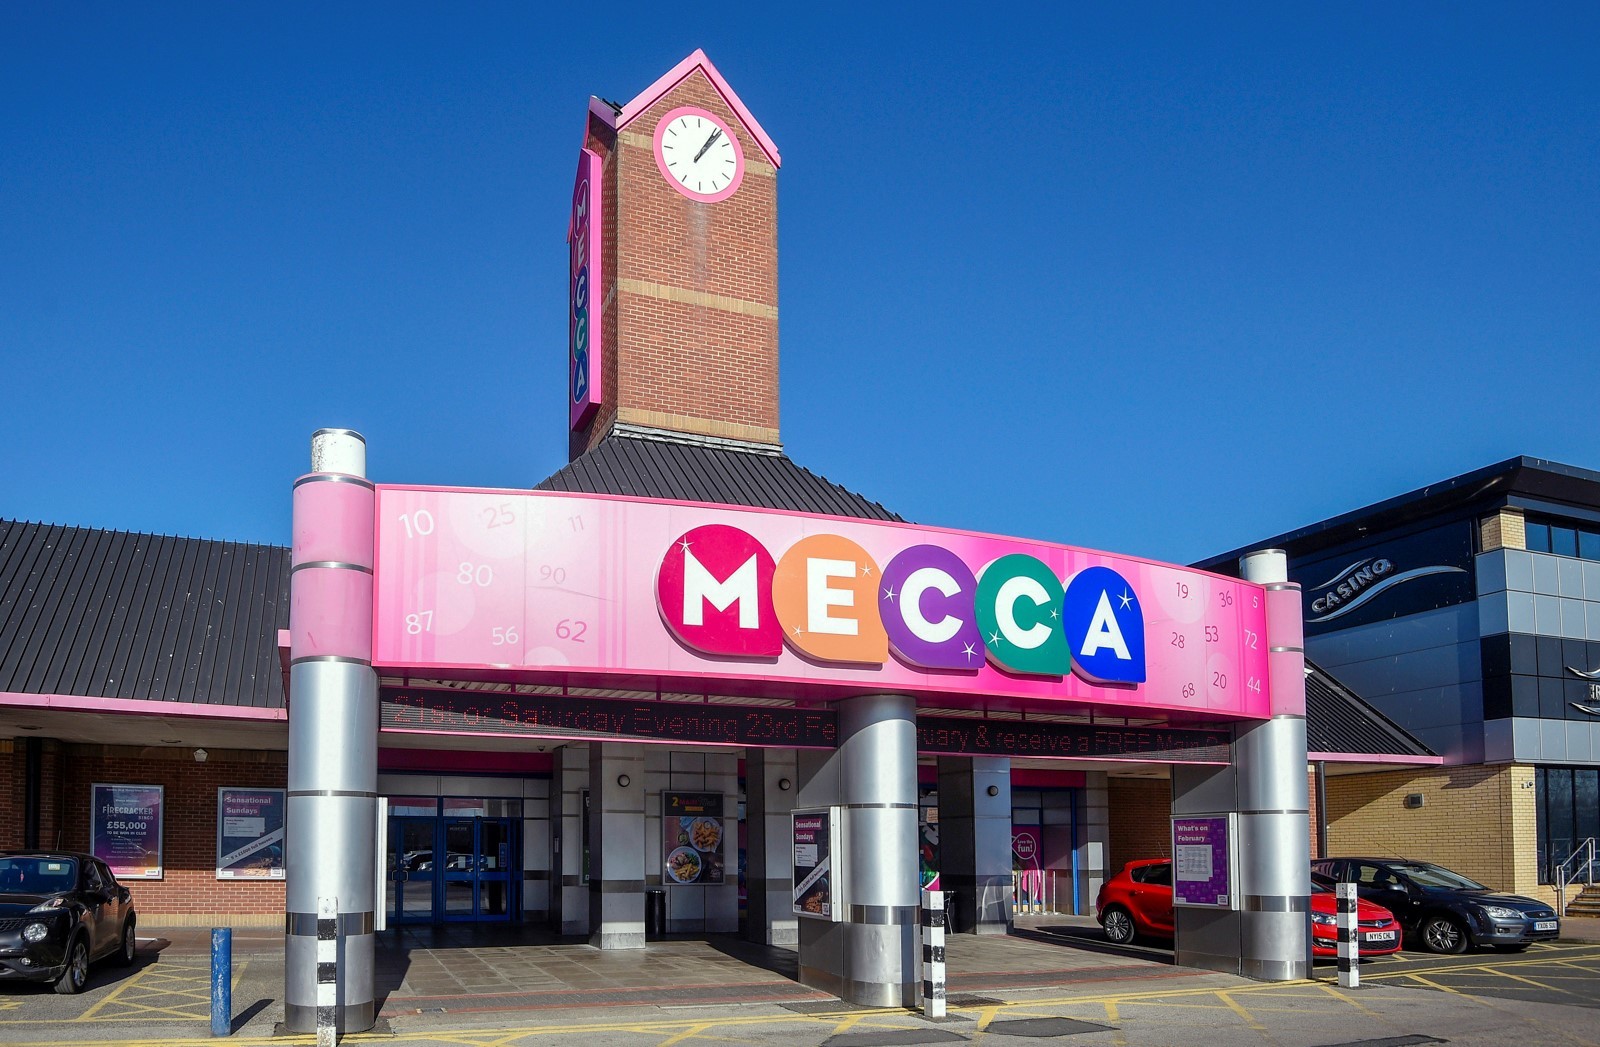 Eyes Down, Shutters Up: Rank Group to Reopen Mecca Bingo Halls, Set Example for Poker Rooms